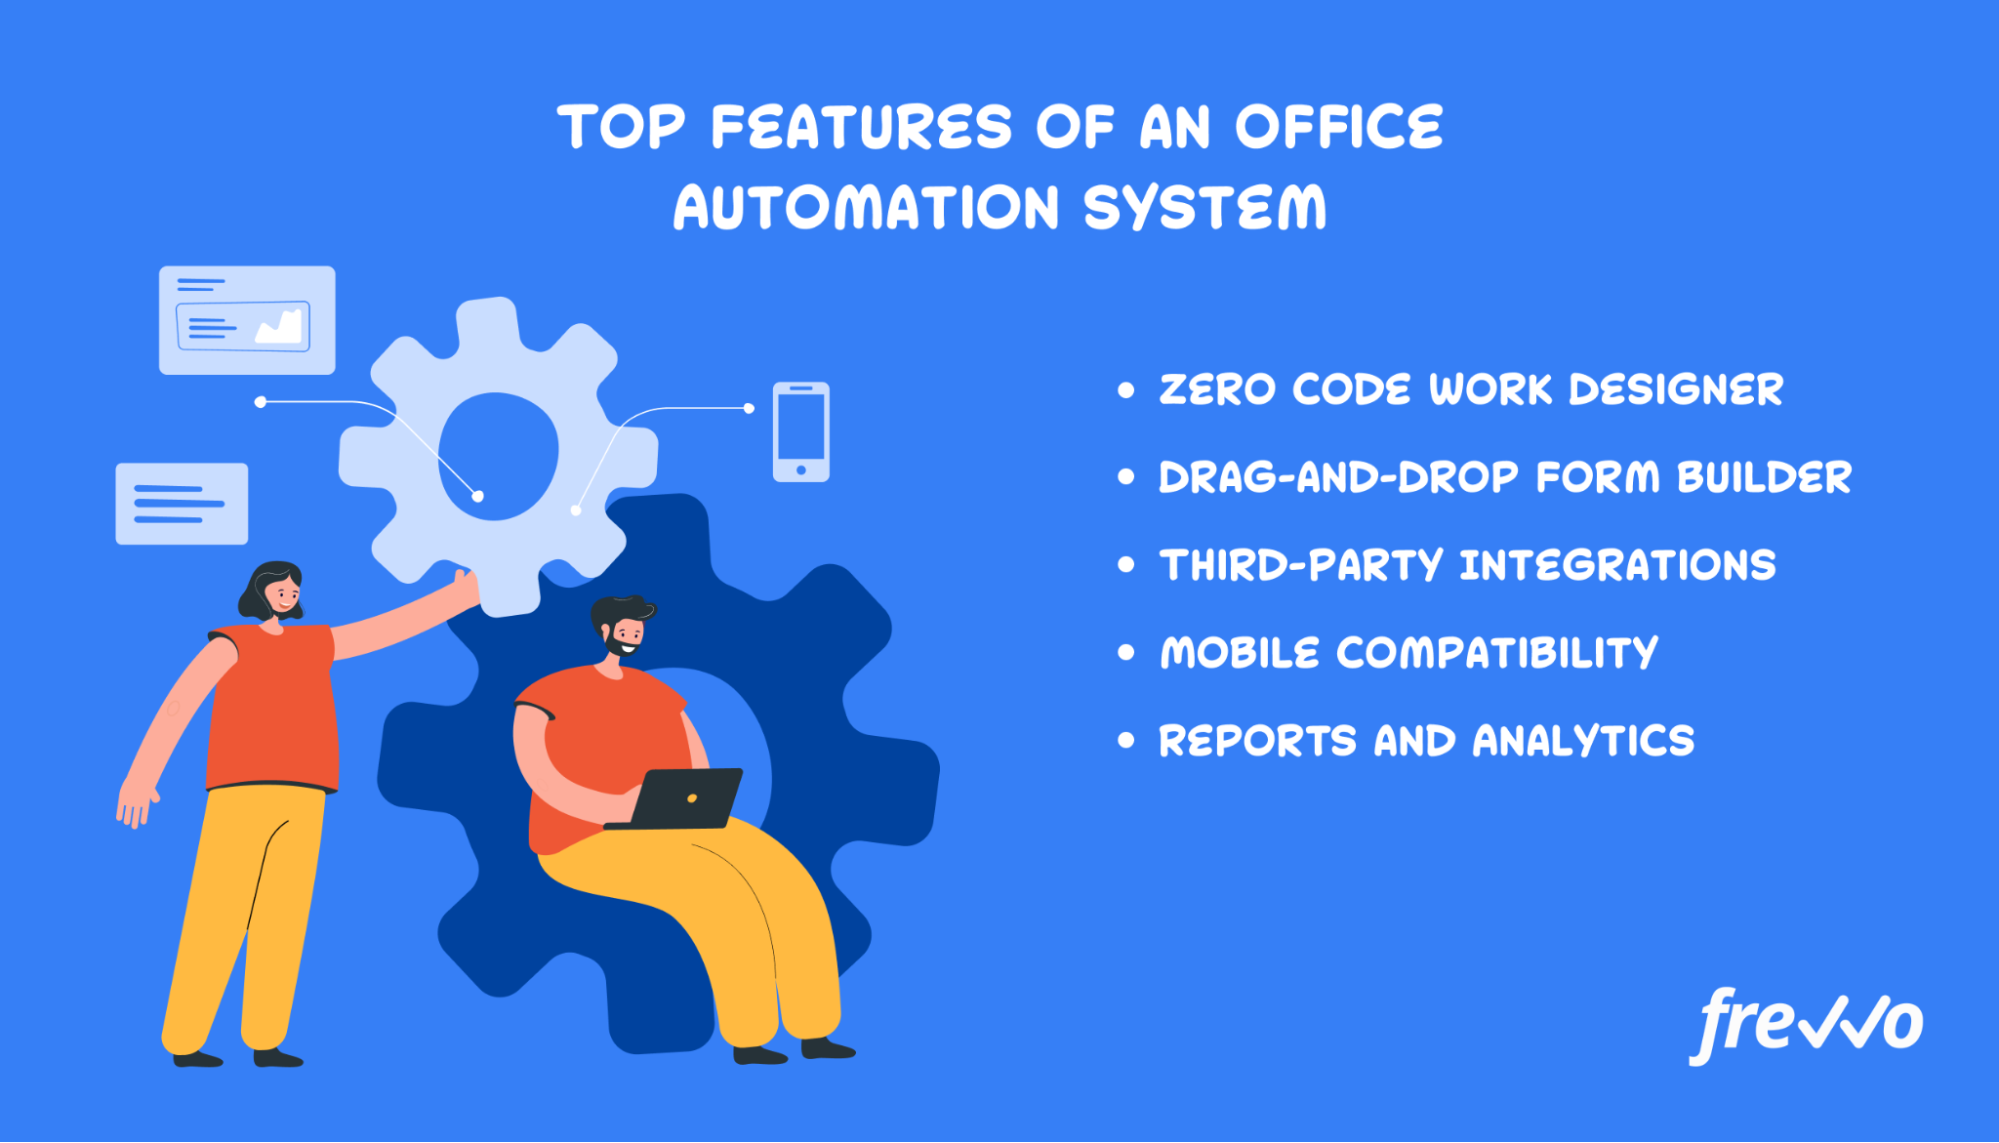 Choosing an office automation system